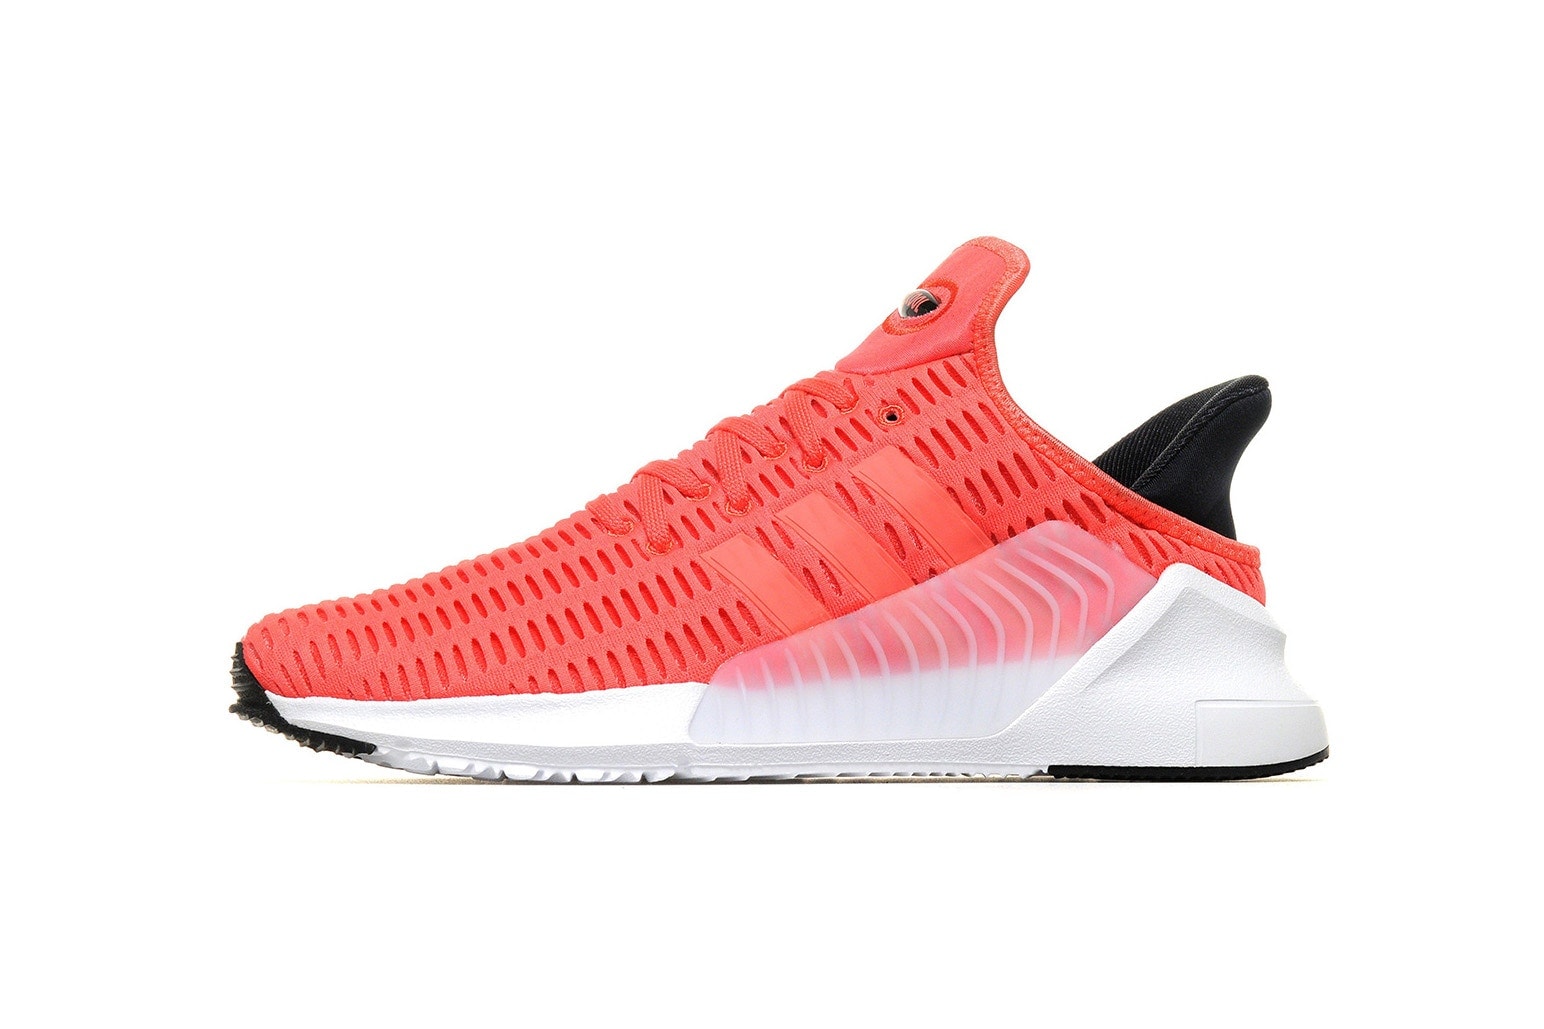 adidas Climacool 02/17 Infrared